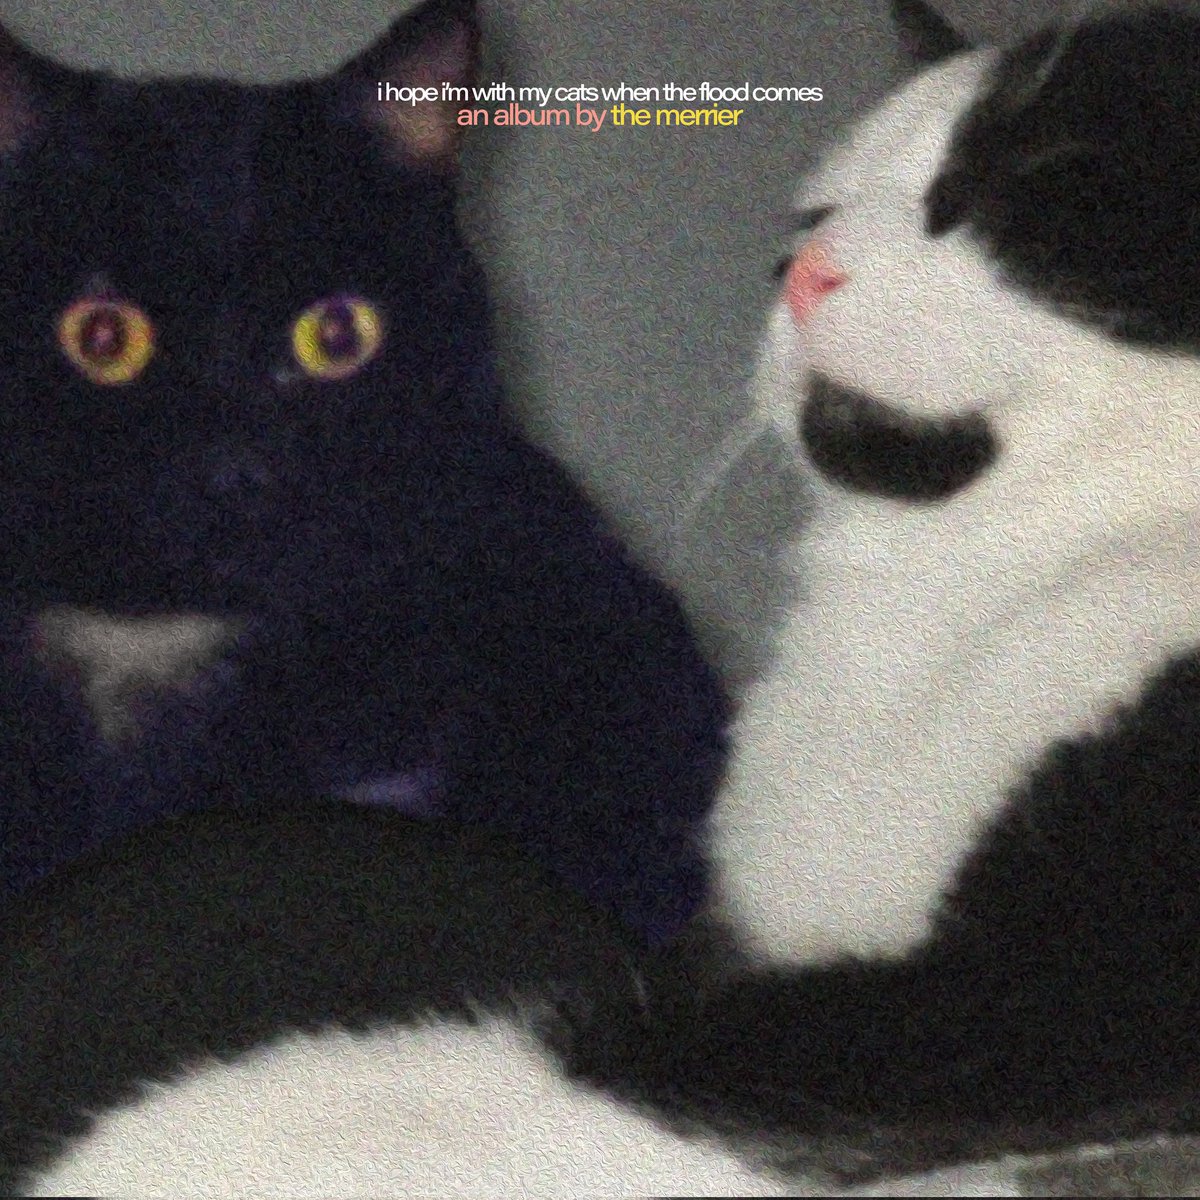 .@merriermerrier has a dreamo LP coming out in less than a week! Don't forget to presave 'i hope i'm with my cats when the flood comes' featuring a lot of great emo/diy artists including @gabbofrank666 @oldphonela @palettestaches @eichlers__ @masakiio_ @heyilyforever + more!